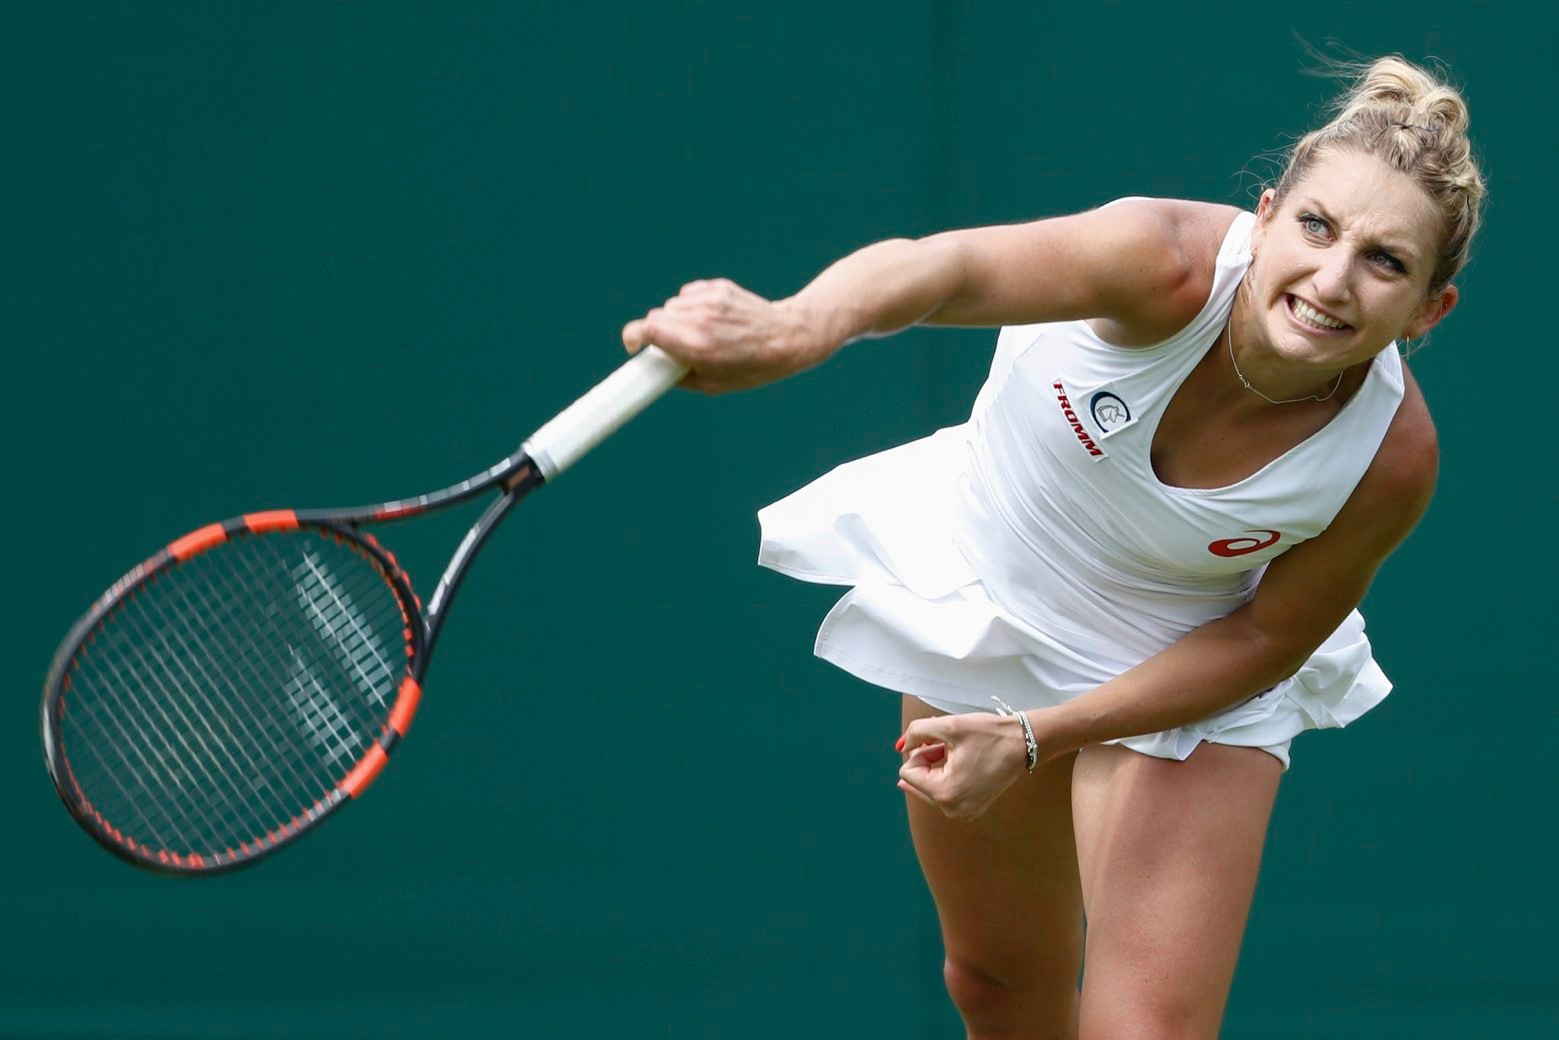 Timea Bacsinszky of Switzerland in action during a training session at the All England Lawn Tennis Championships in Wimbledon, London, Friday, June 24, 2016. The Wimbledon Tennis Championships 2016 will be held in London from 27 June to 10 July. (KEYSTONE/Peter Klaunzer) BRITAIN TENNIS WIMBLEDON 2016